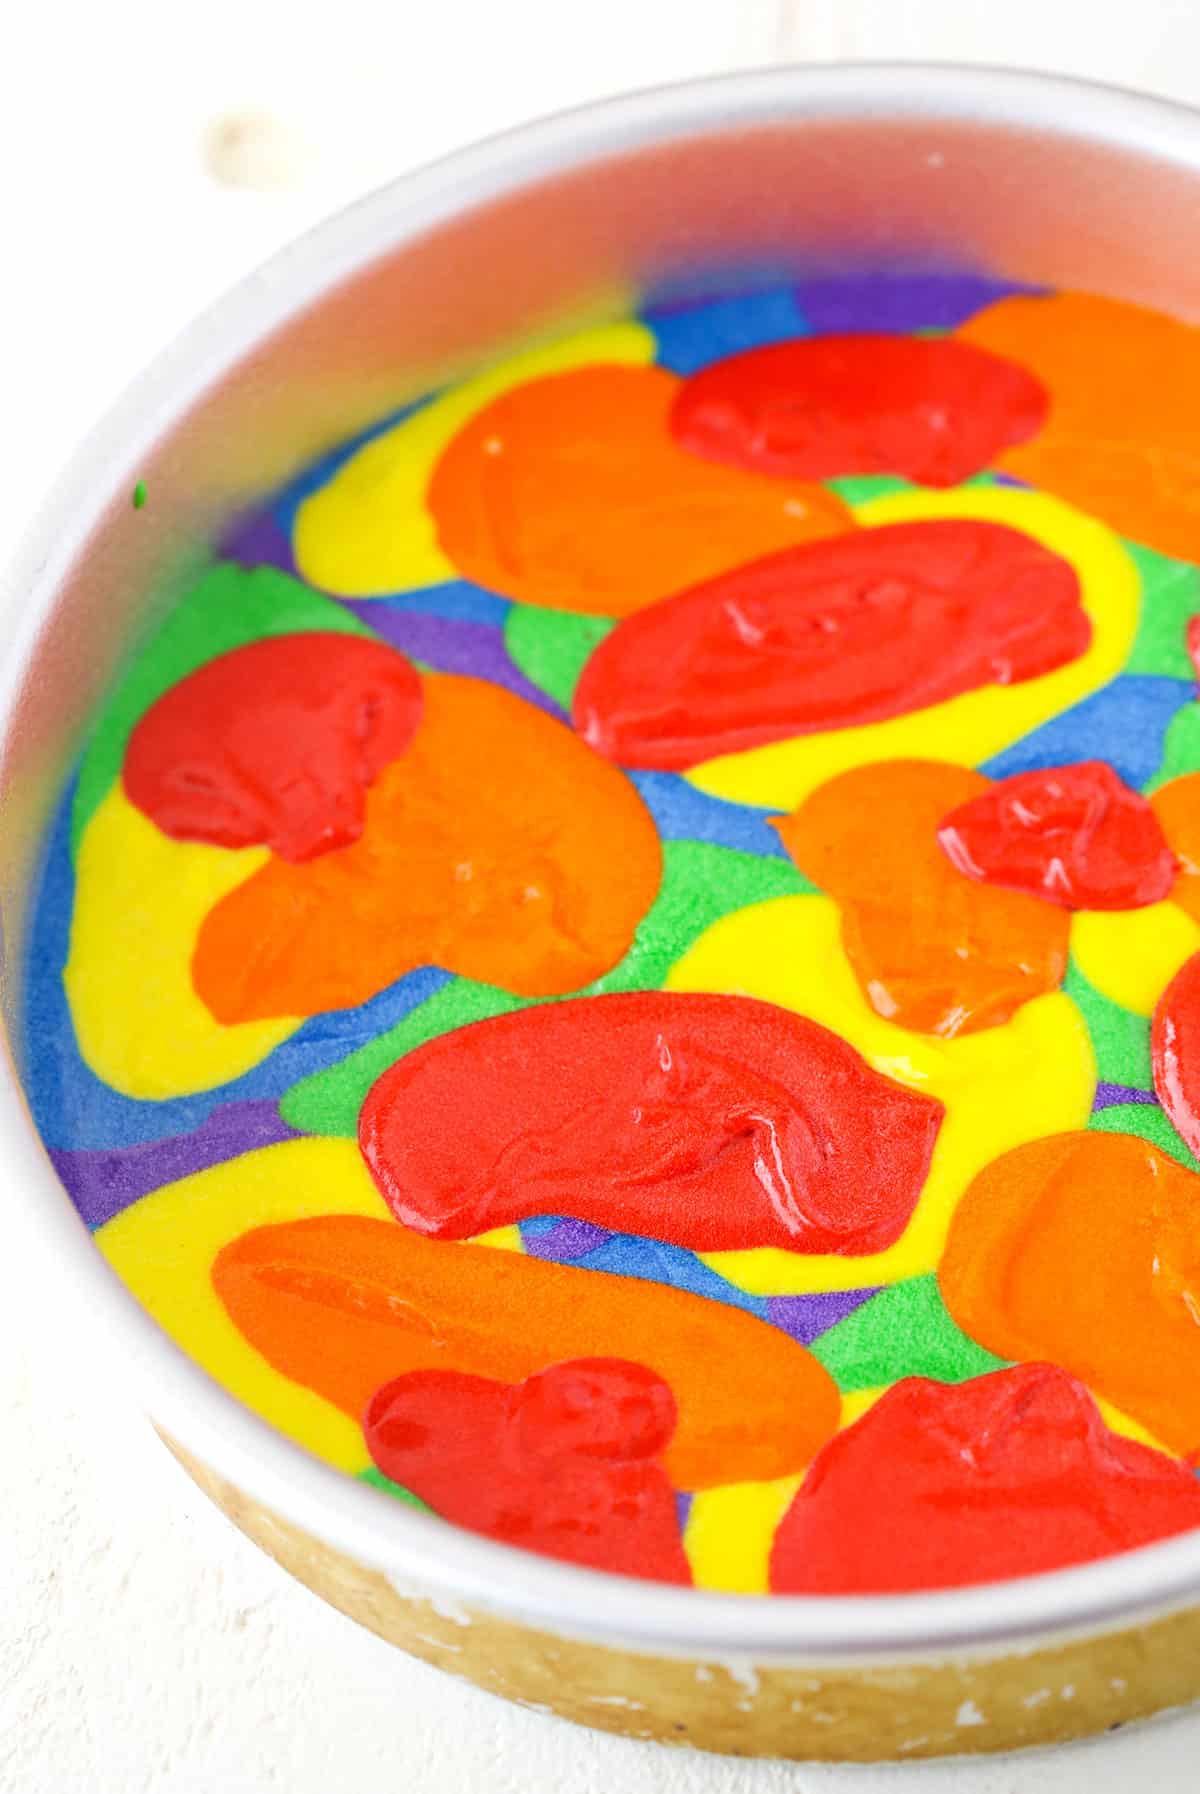 A step in making Rainbow Swirl Cake showing the layering of the cake batter to create the swirl effect